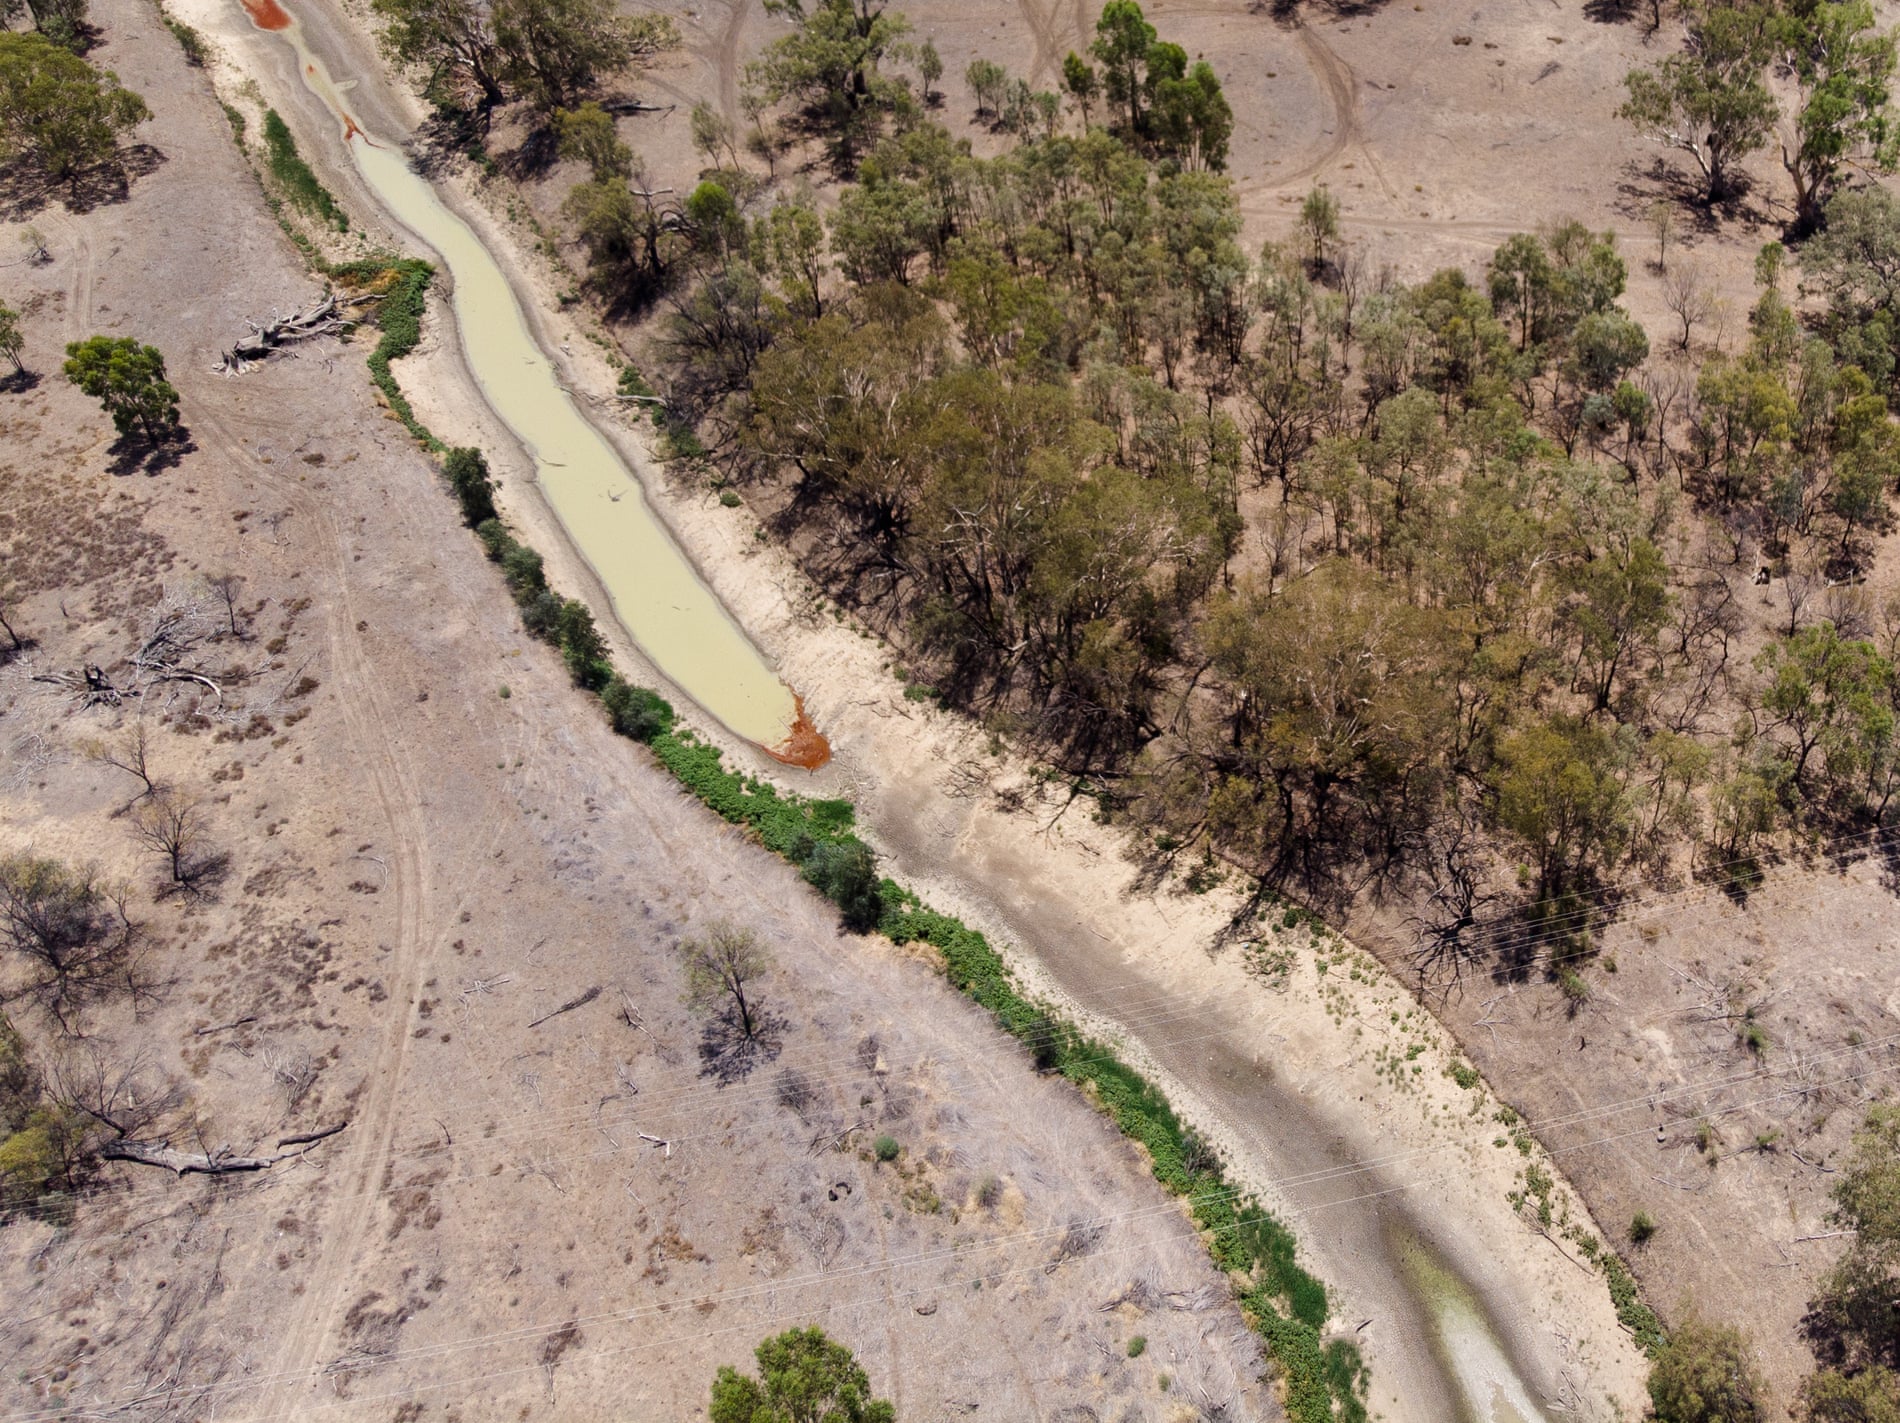 An aerial image of the dried out Namoi river